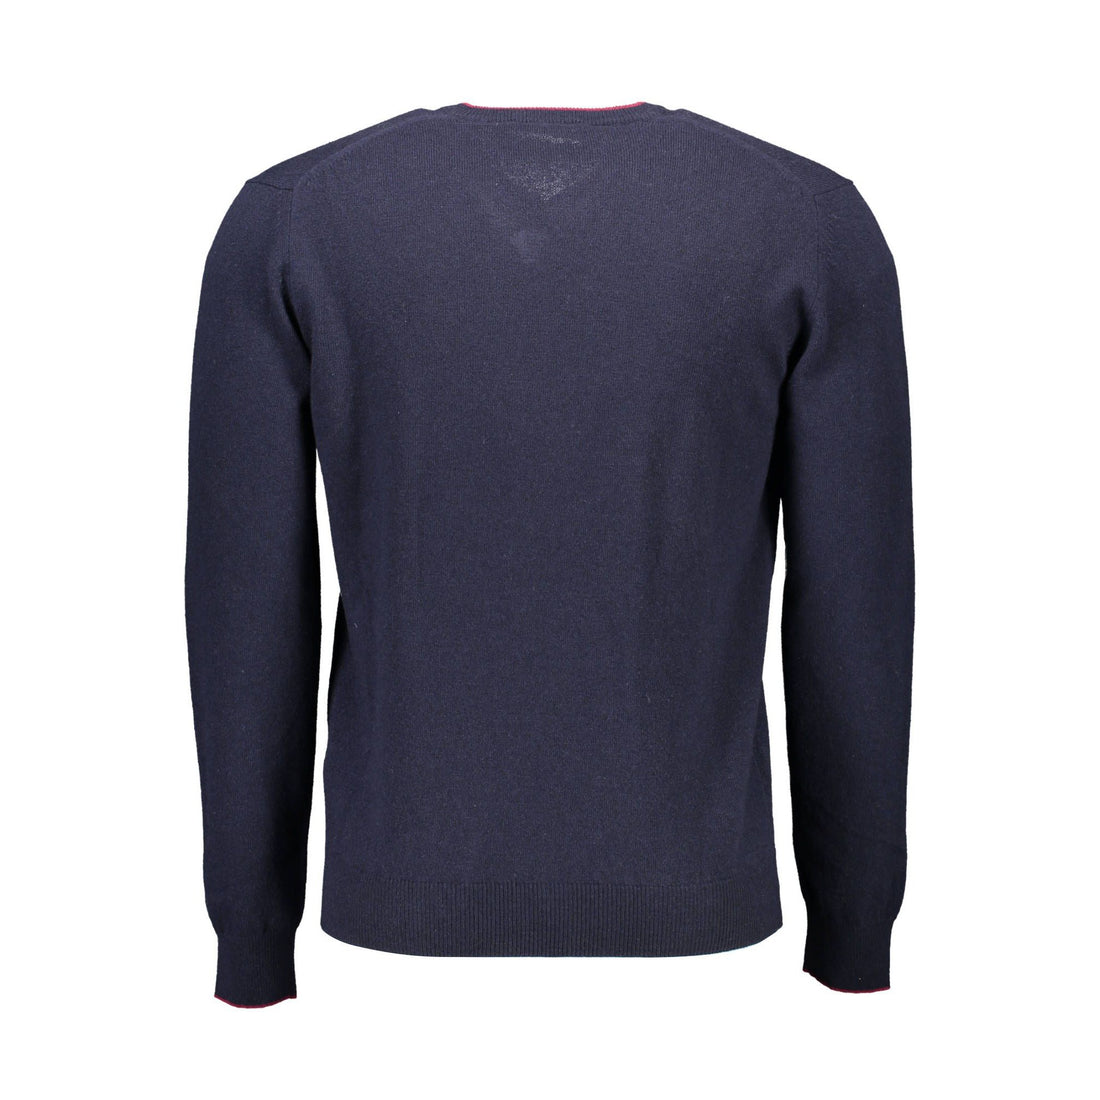 Harmont & Blaine Chic V-Neck Sweater with Contrasting Accents